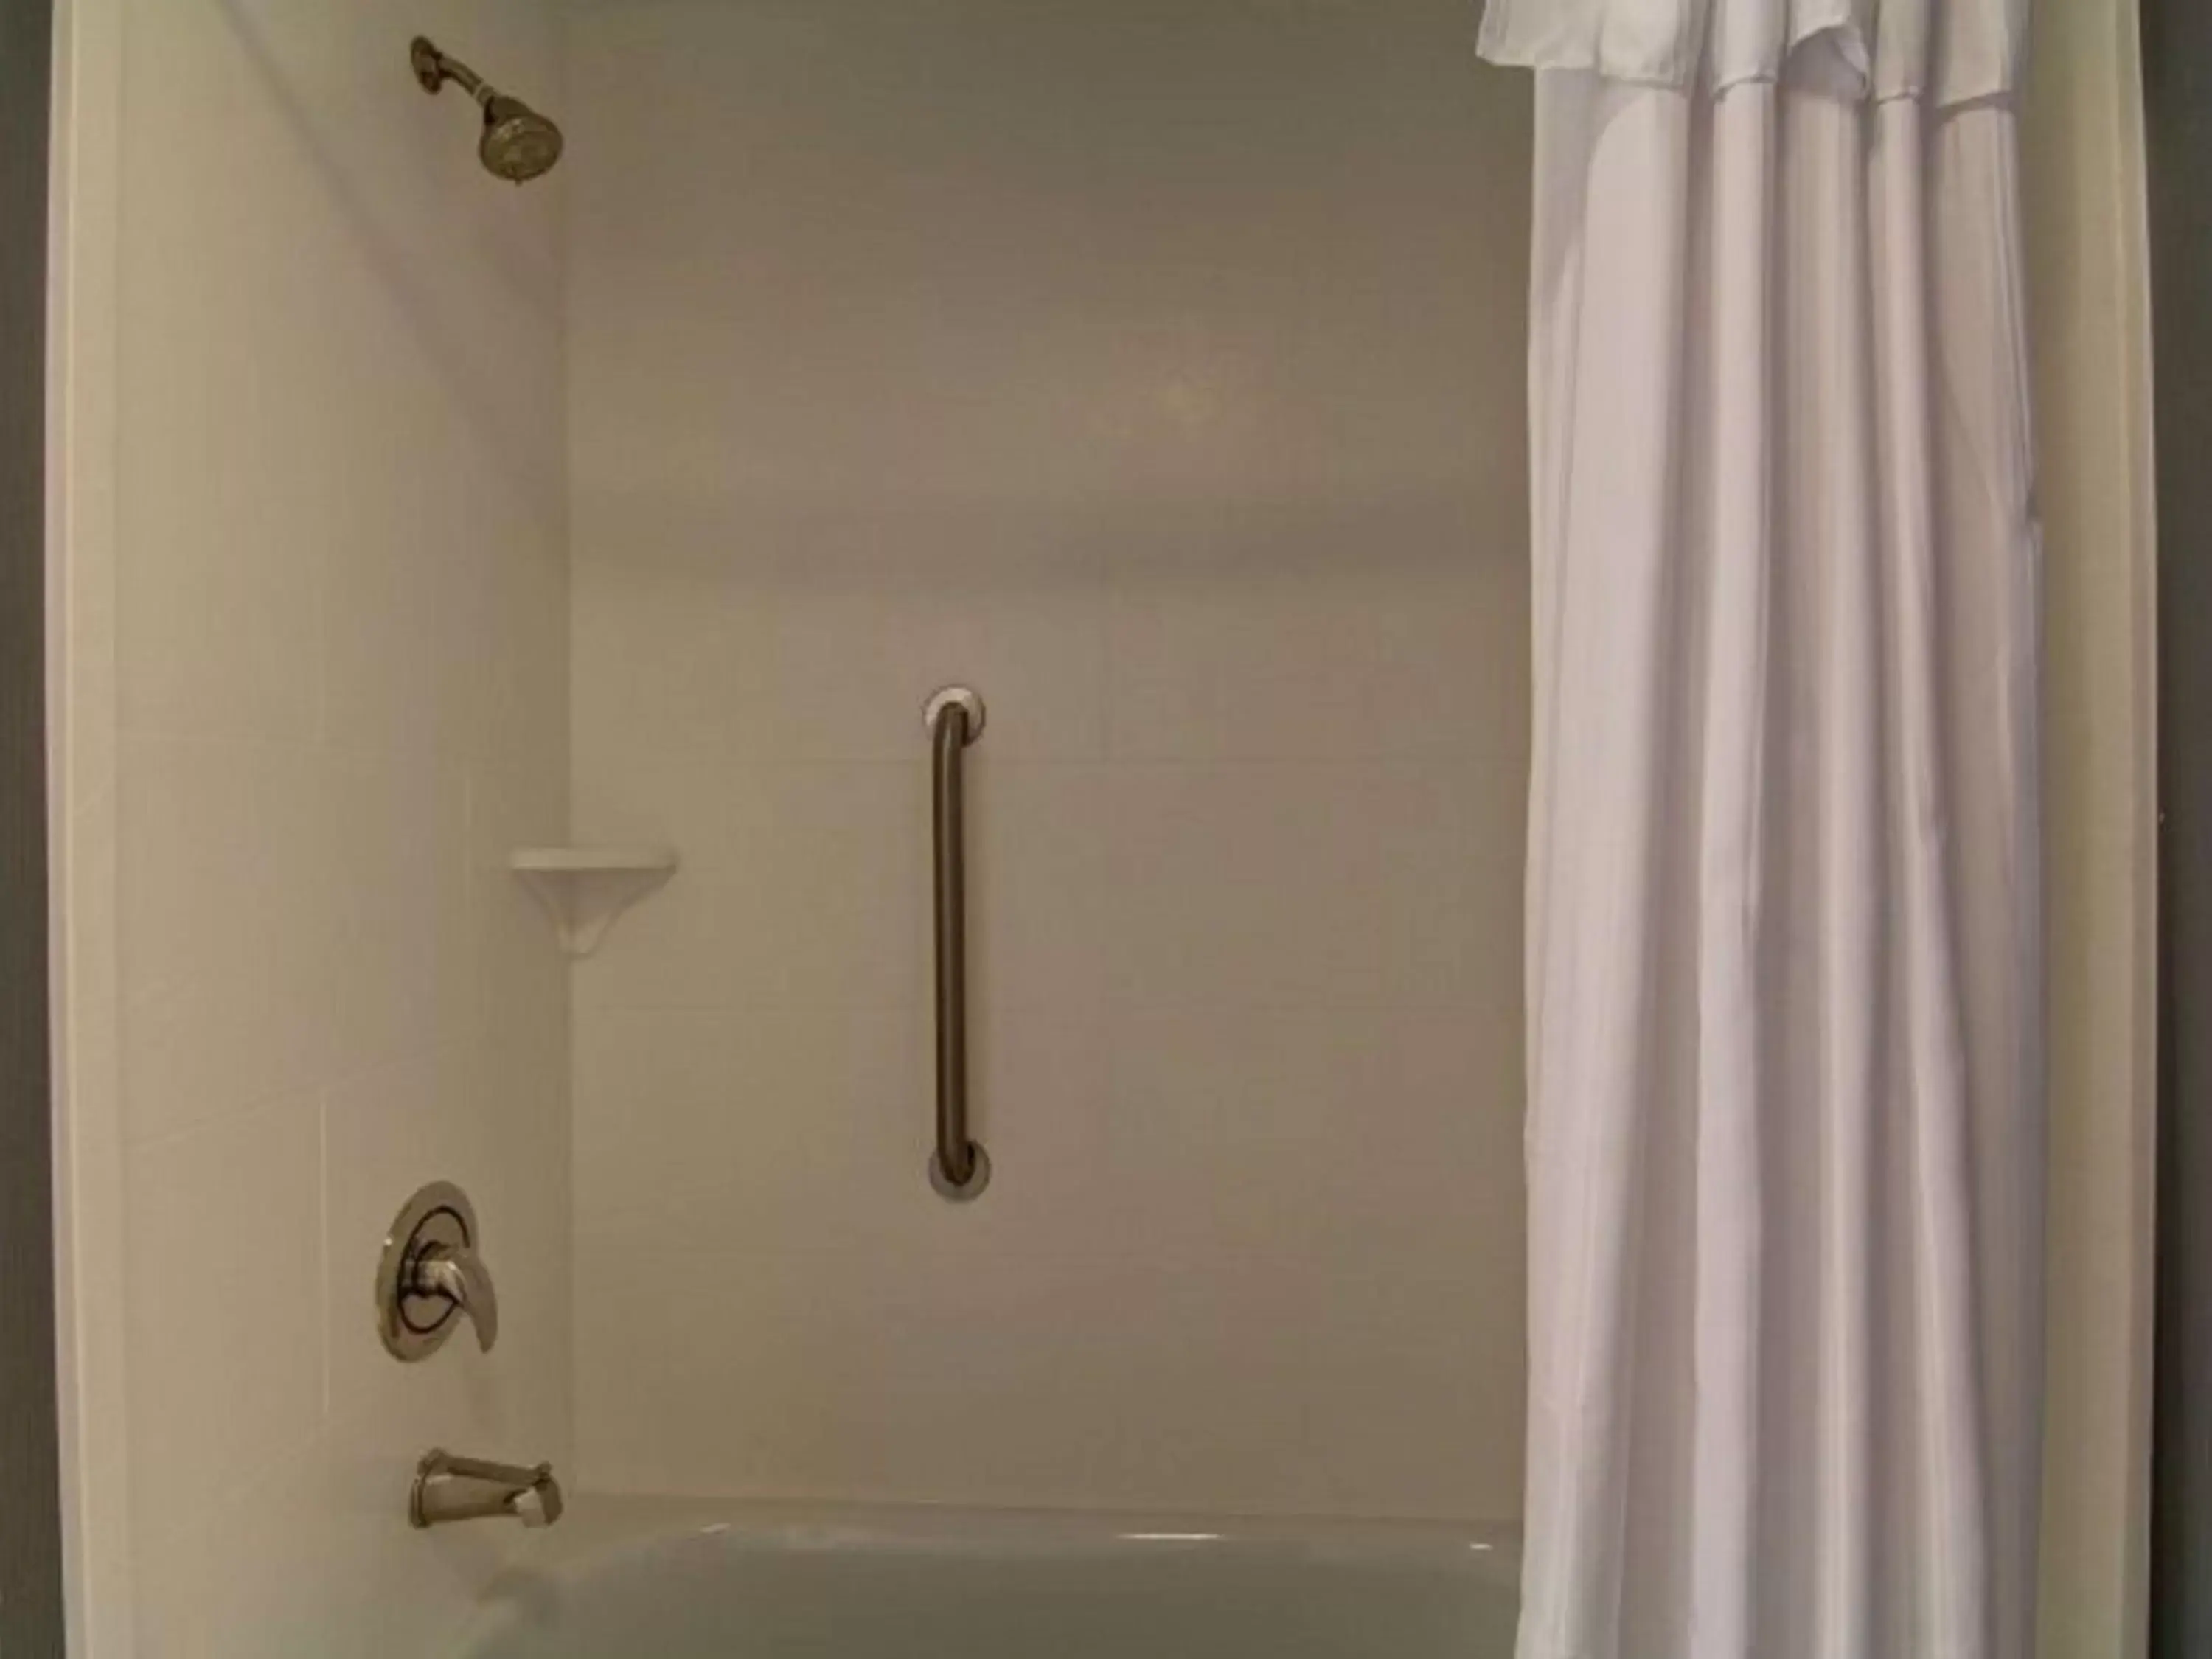 Bathroom in Homewood Suites By Hilton Clifton Park